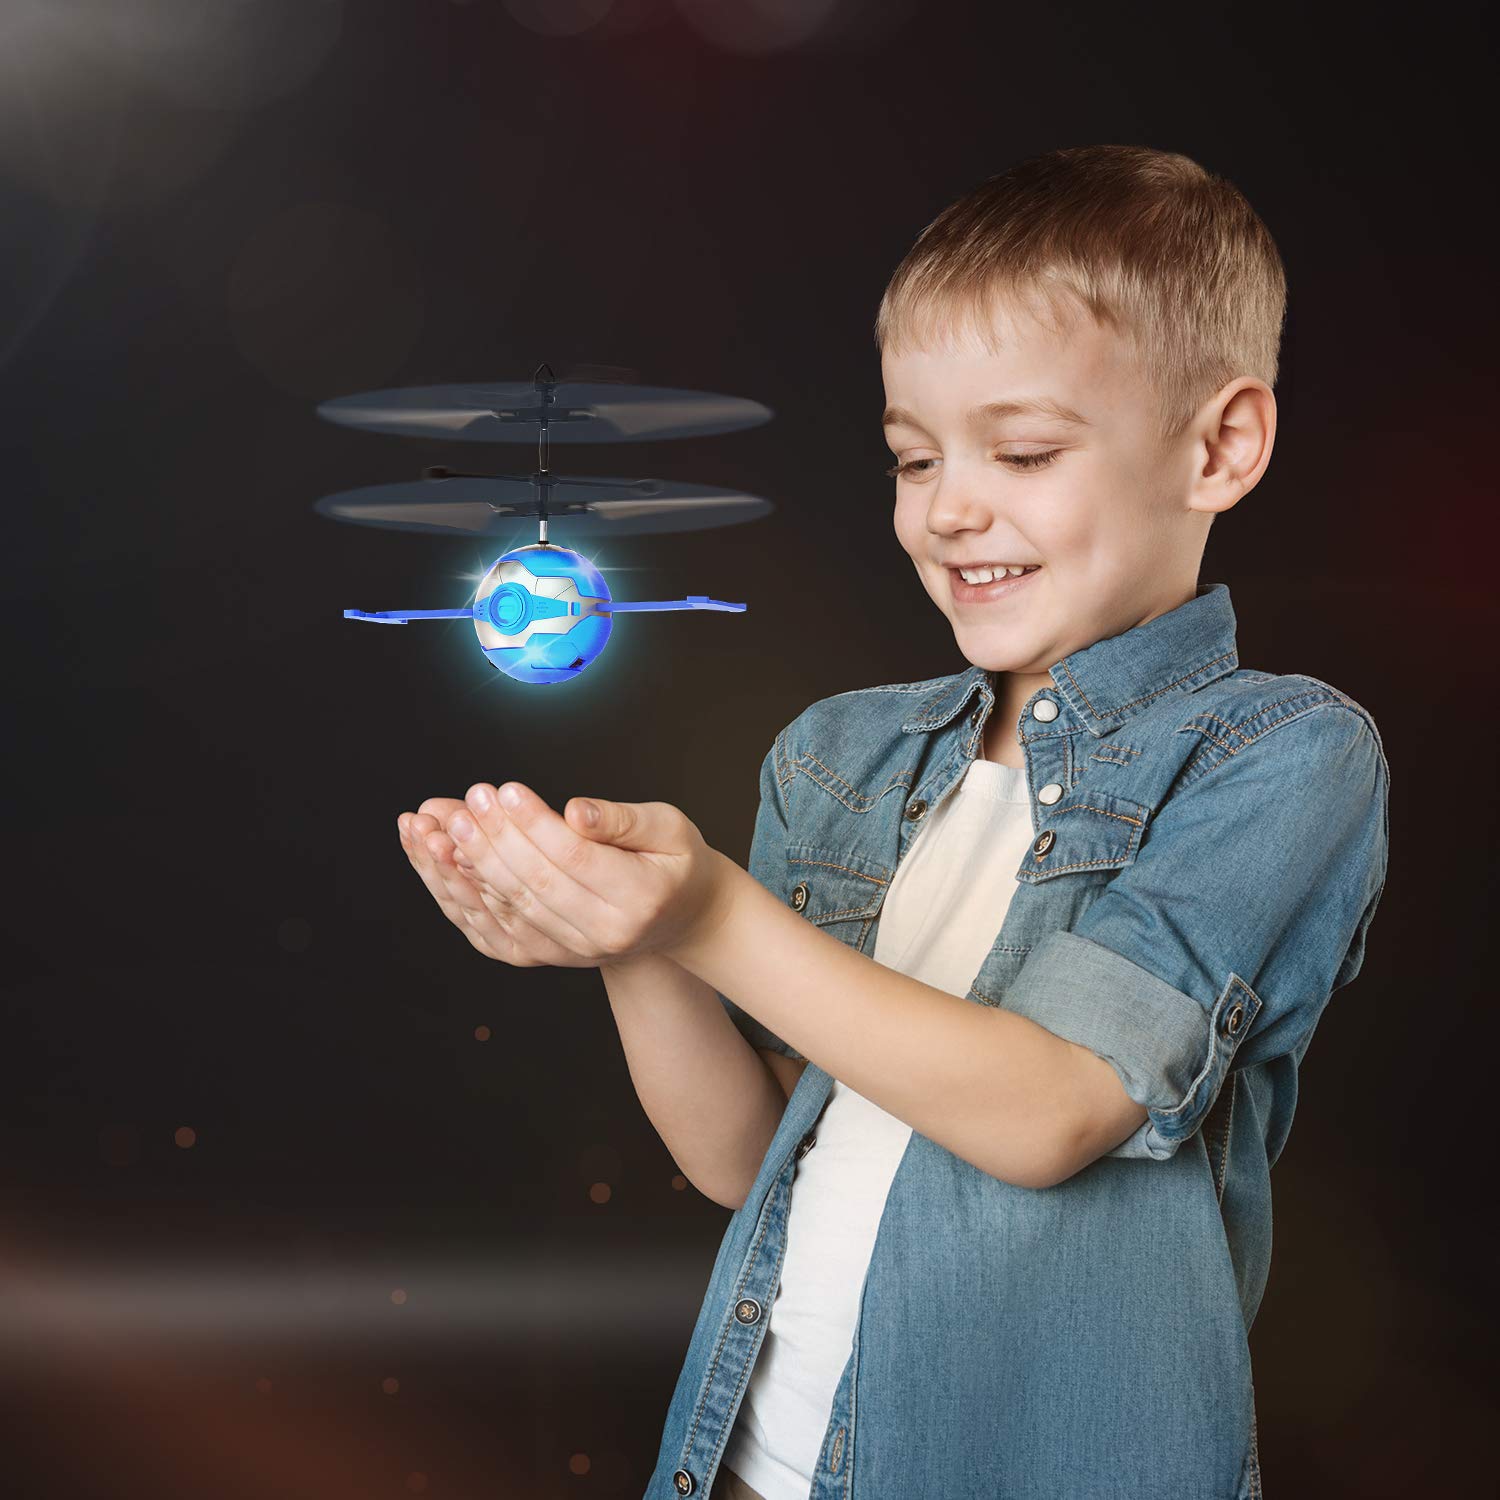 CUKU Flying Toy Ball,Infrared Induction UFO RC Flying Toy,Built-in LED Flying Drone Indoor and Outdoor Games,UFO Flying Ball Toys for 6 7 8 9 10 Year Old Boys and Girls